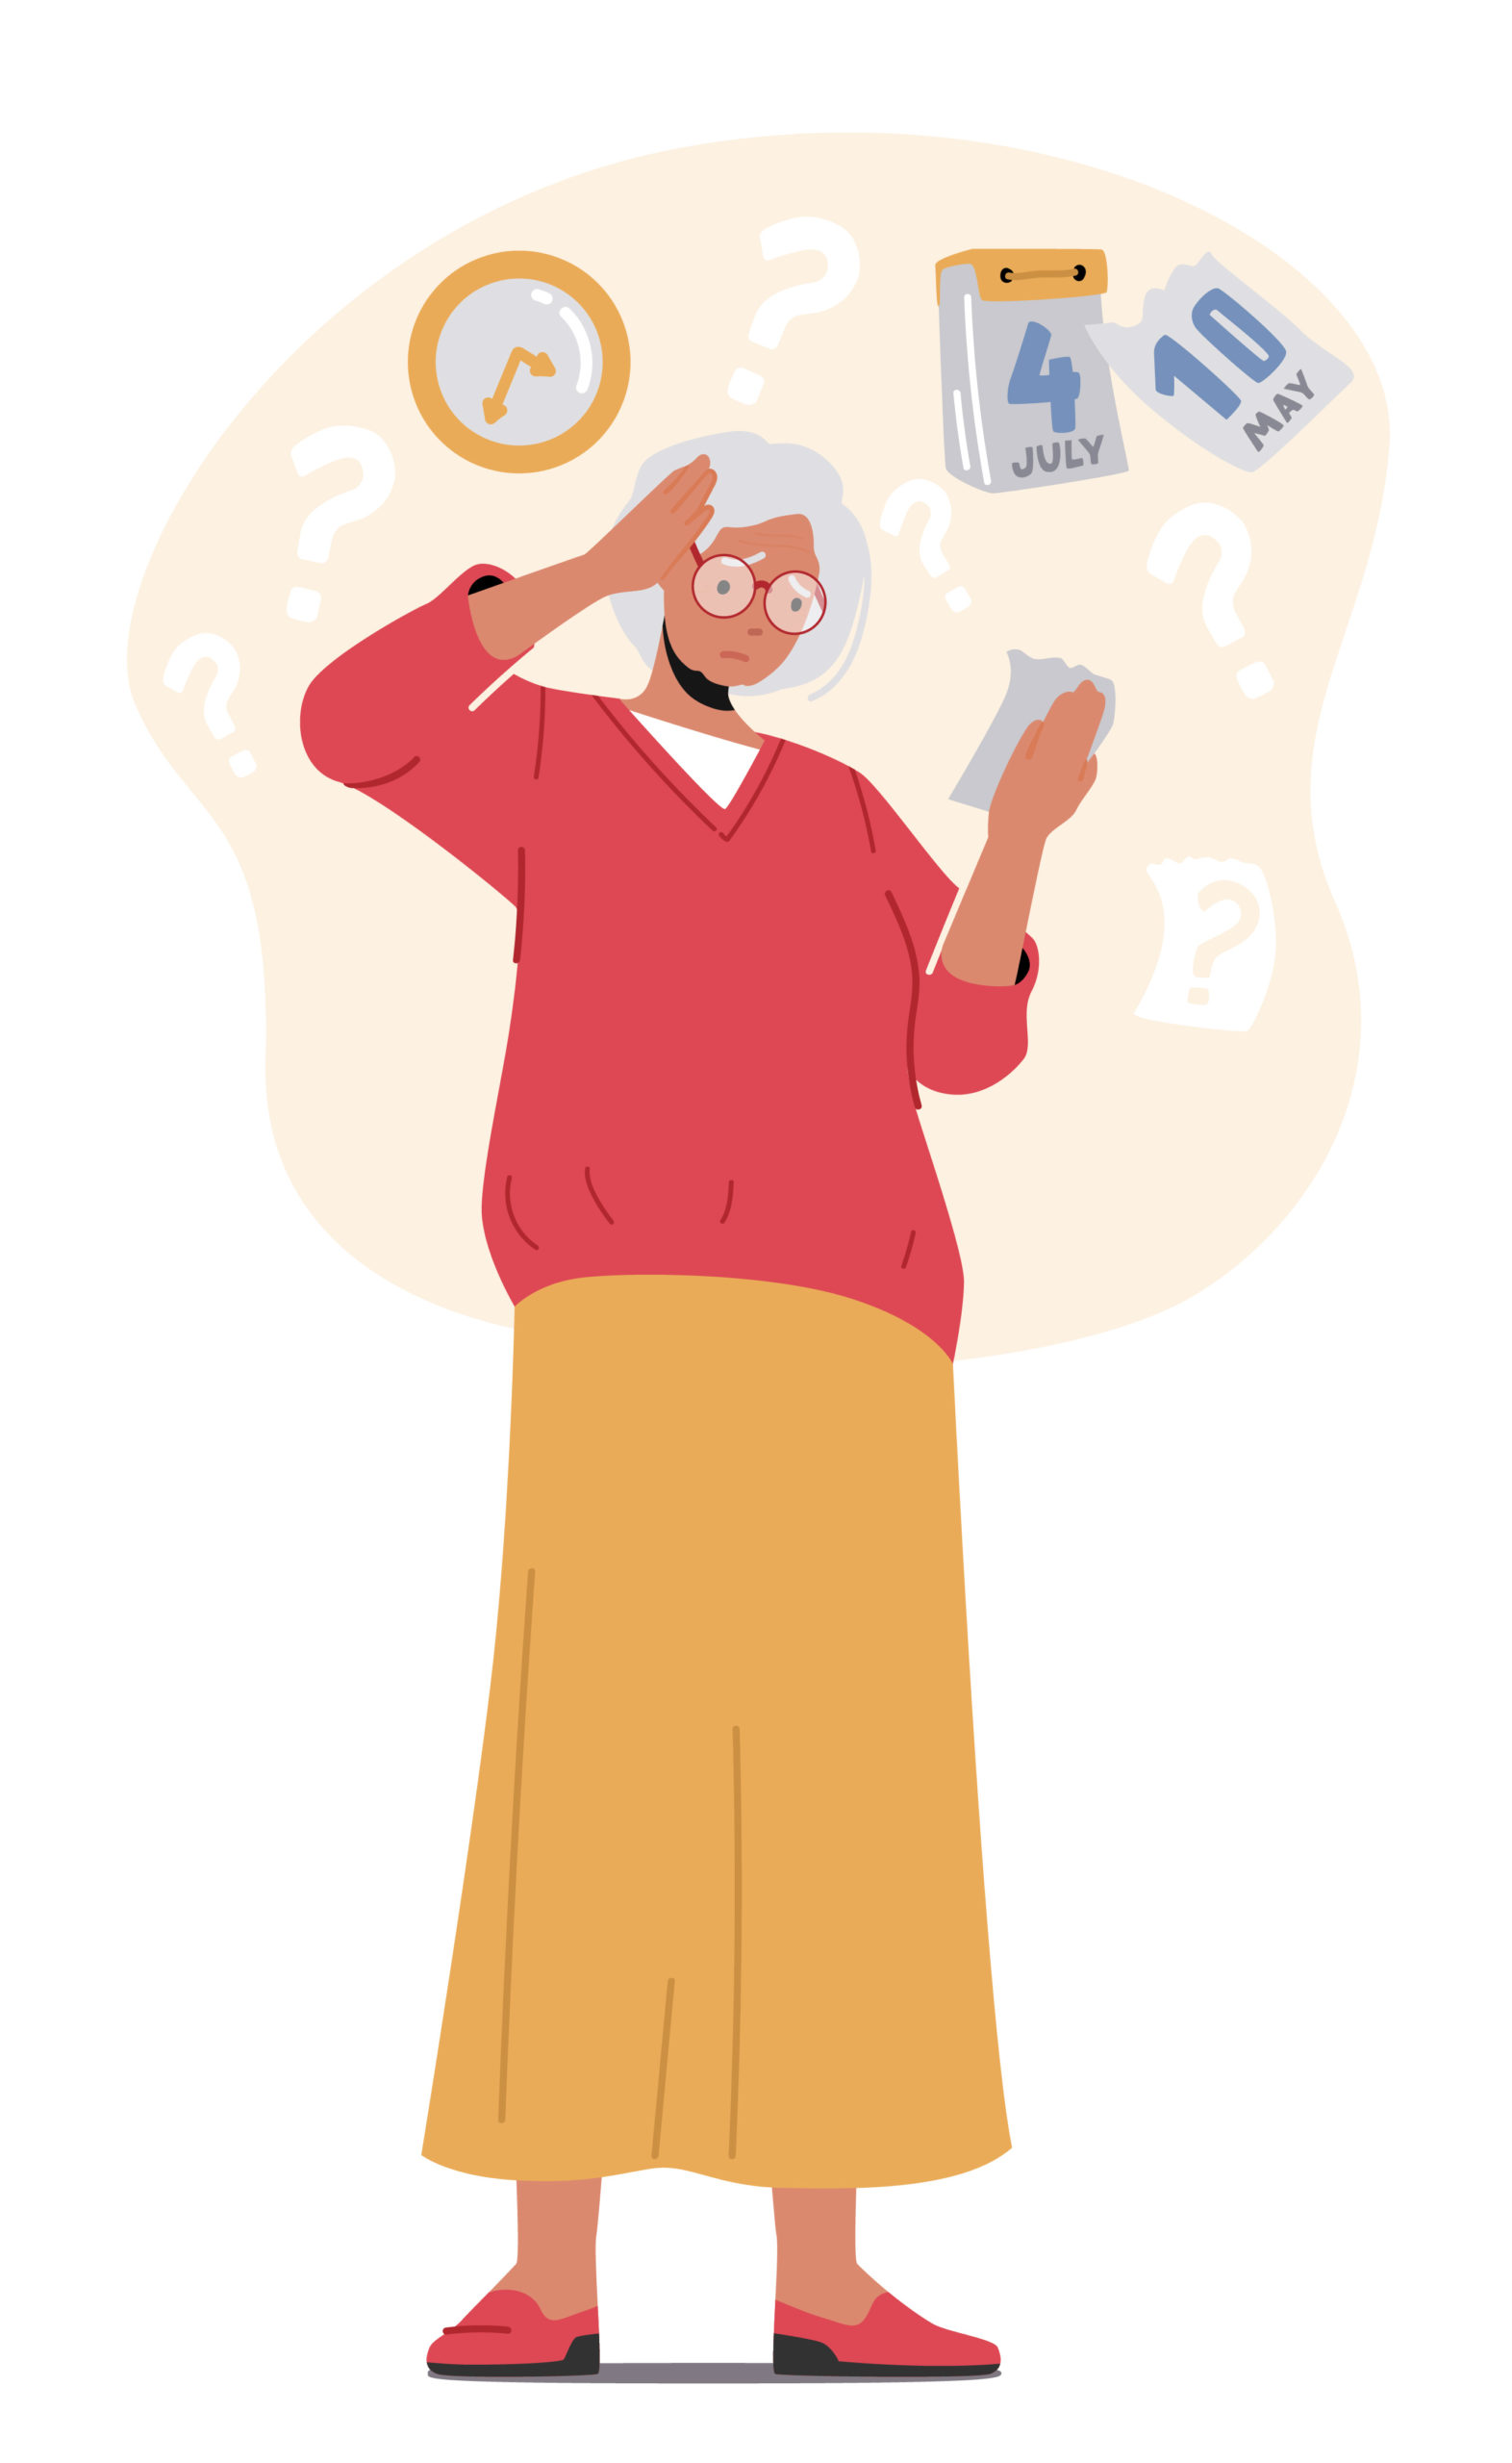 a woman with white hair looking at a piece of paper in her hand who appears confused about time and date